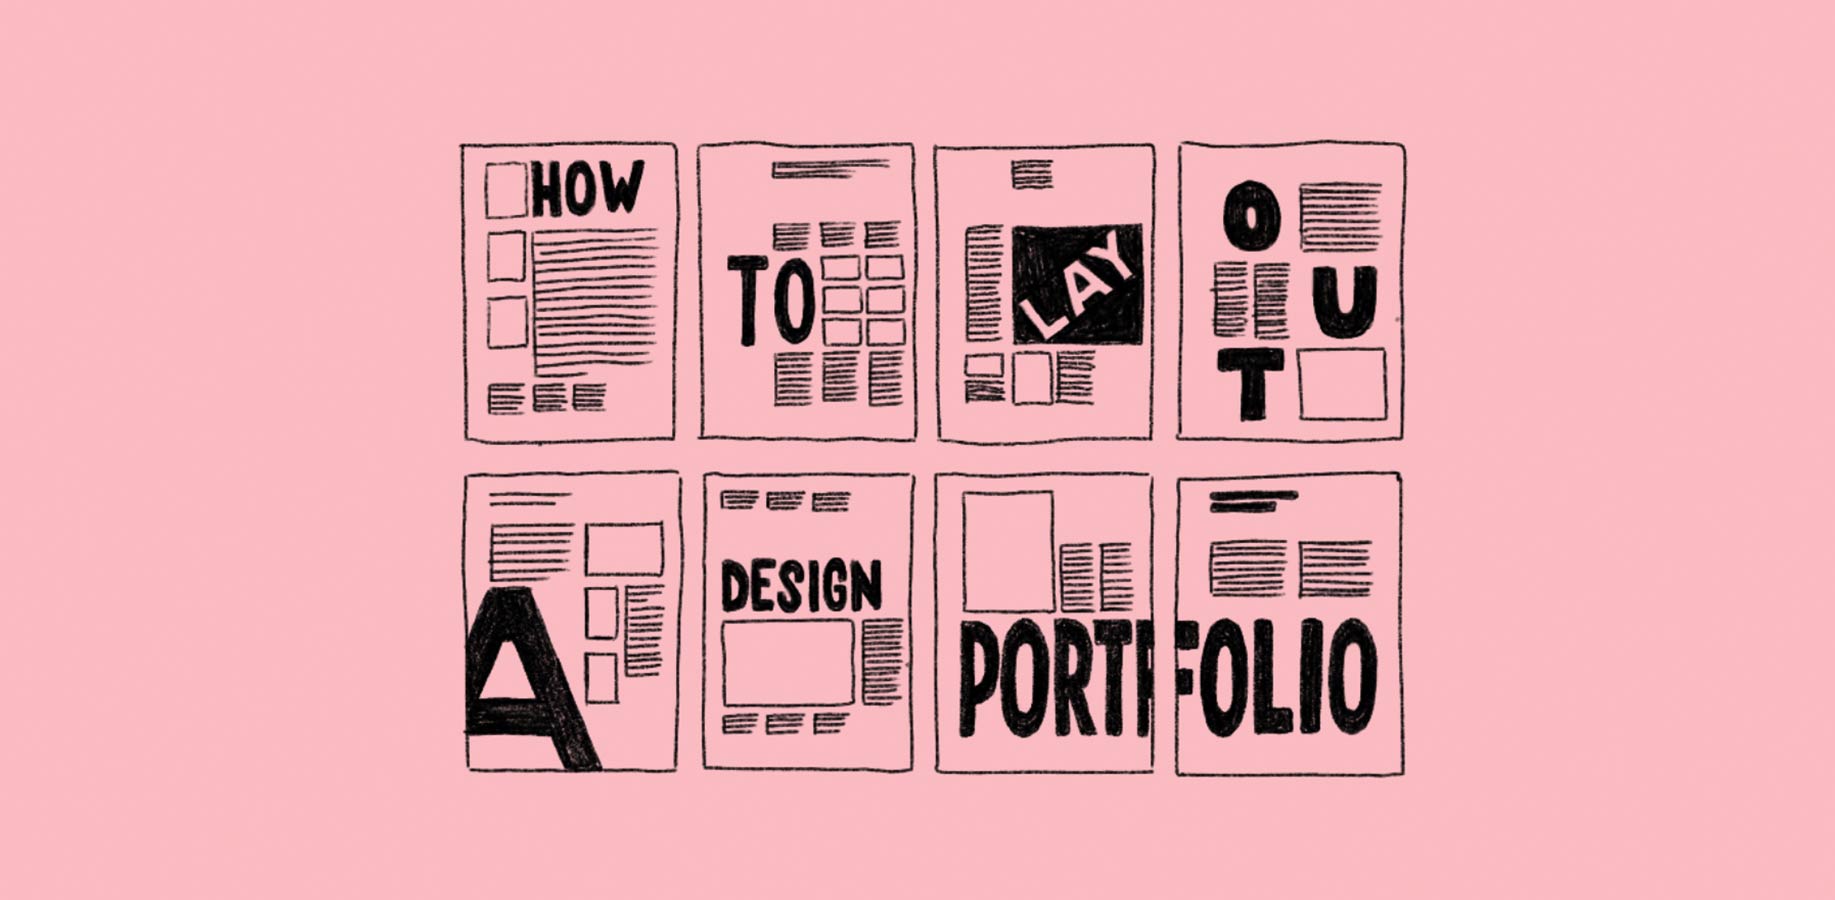 sidebyside_how_to_lay_out_your_portfolio